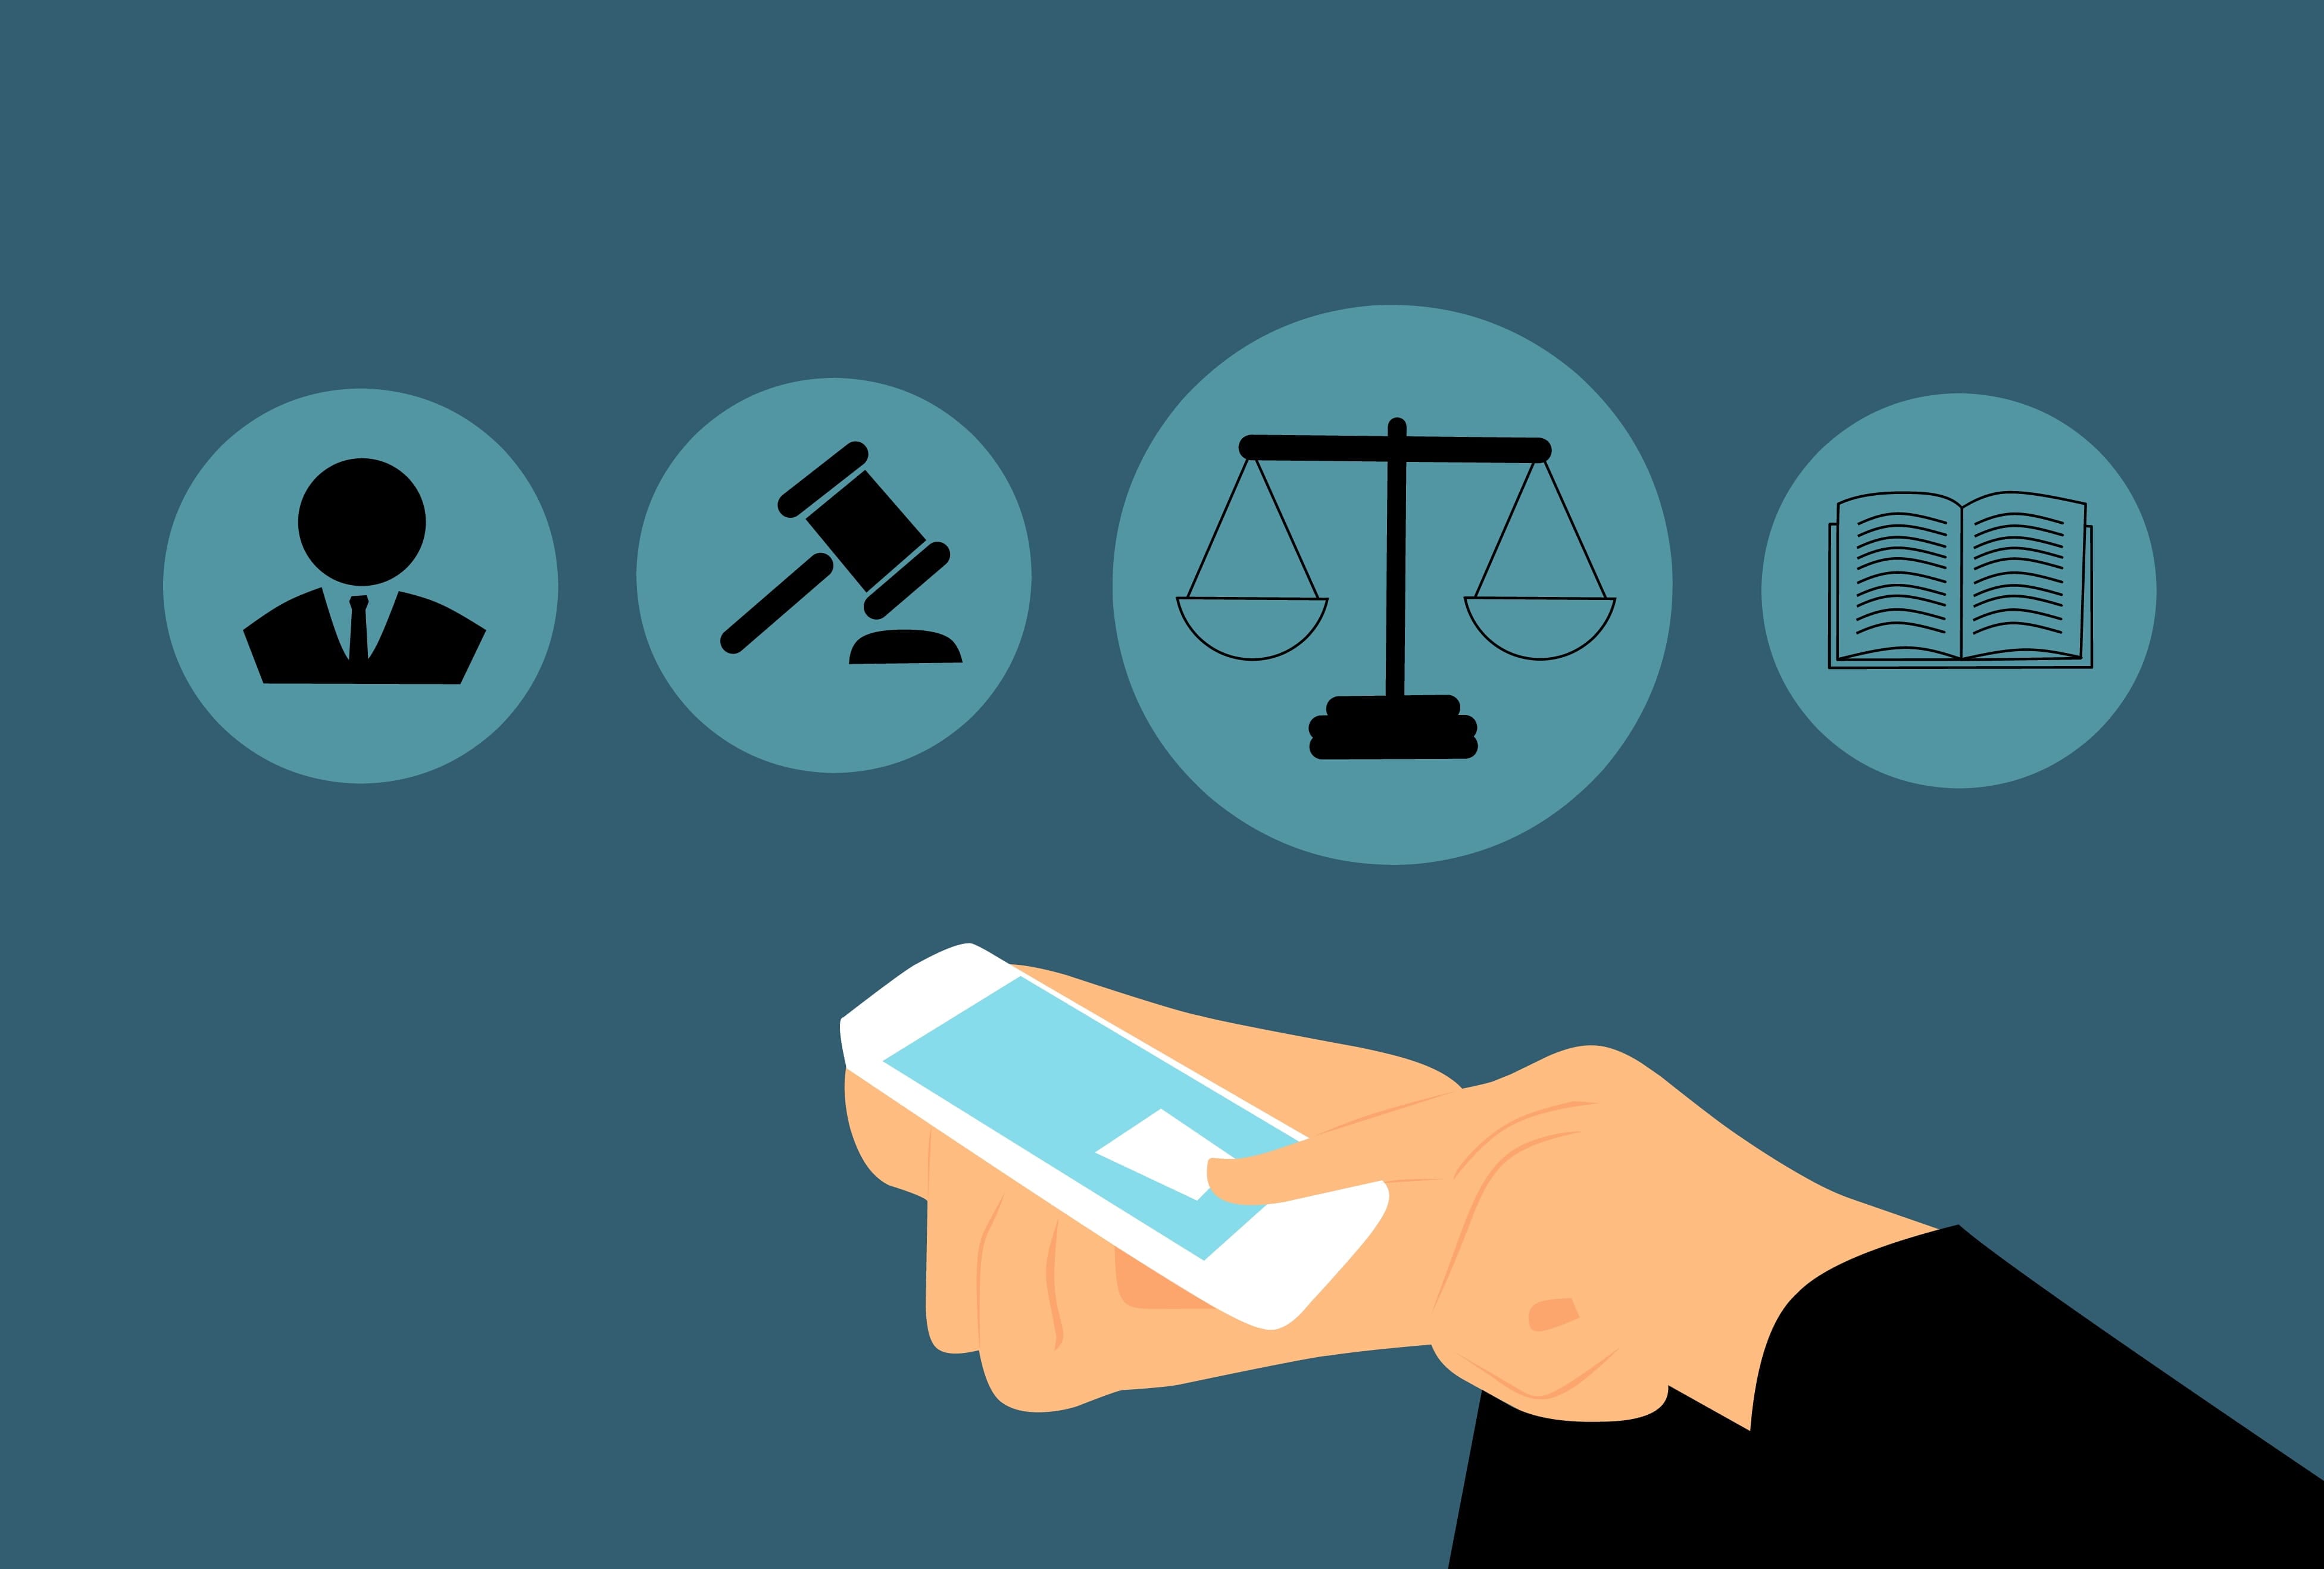 Graphic of person using smartphone to access the scales of justice; image via piqsels.com CCO.